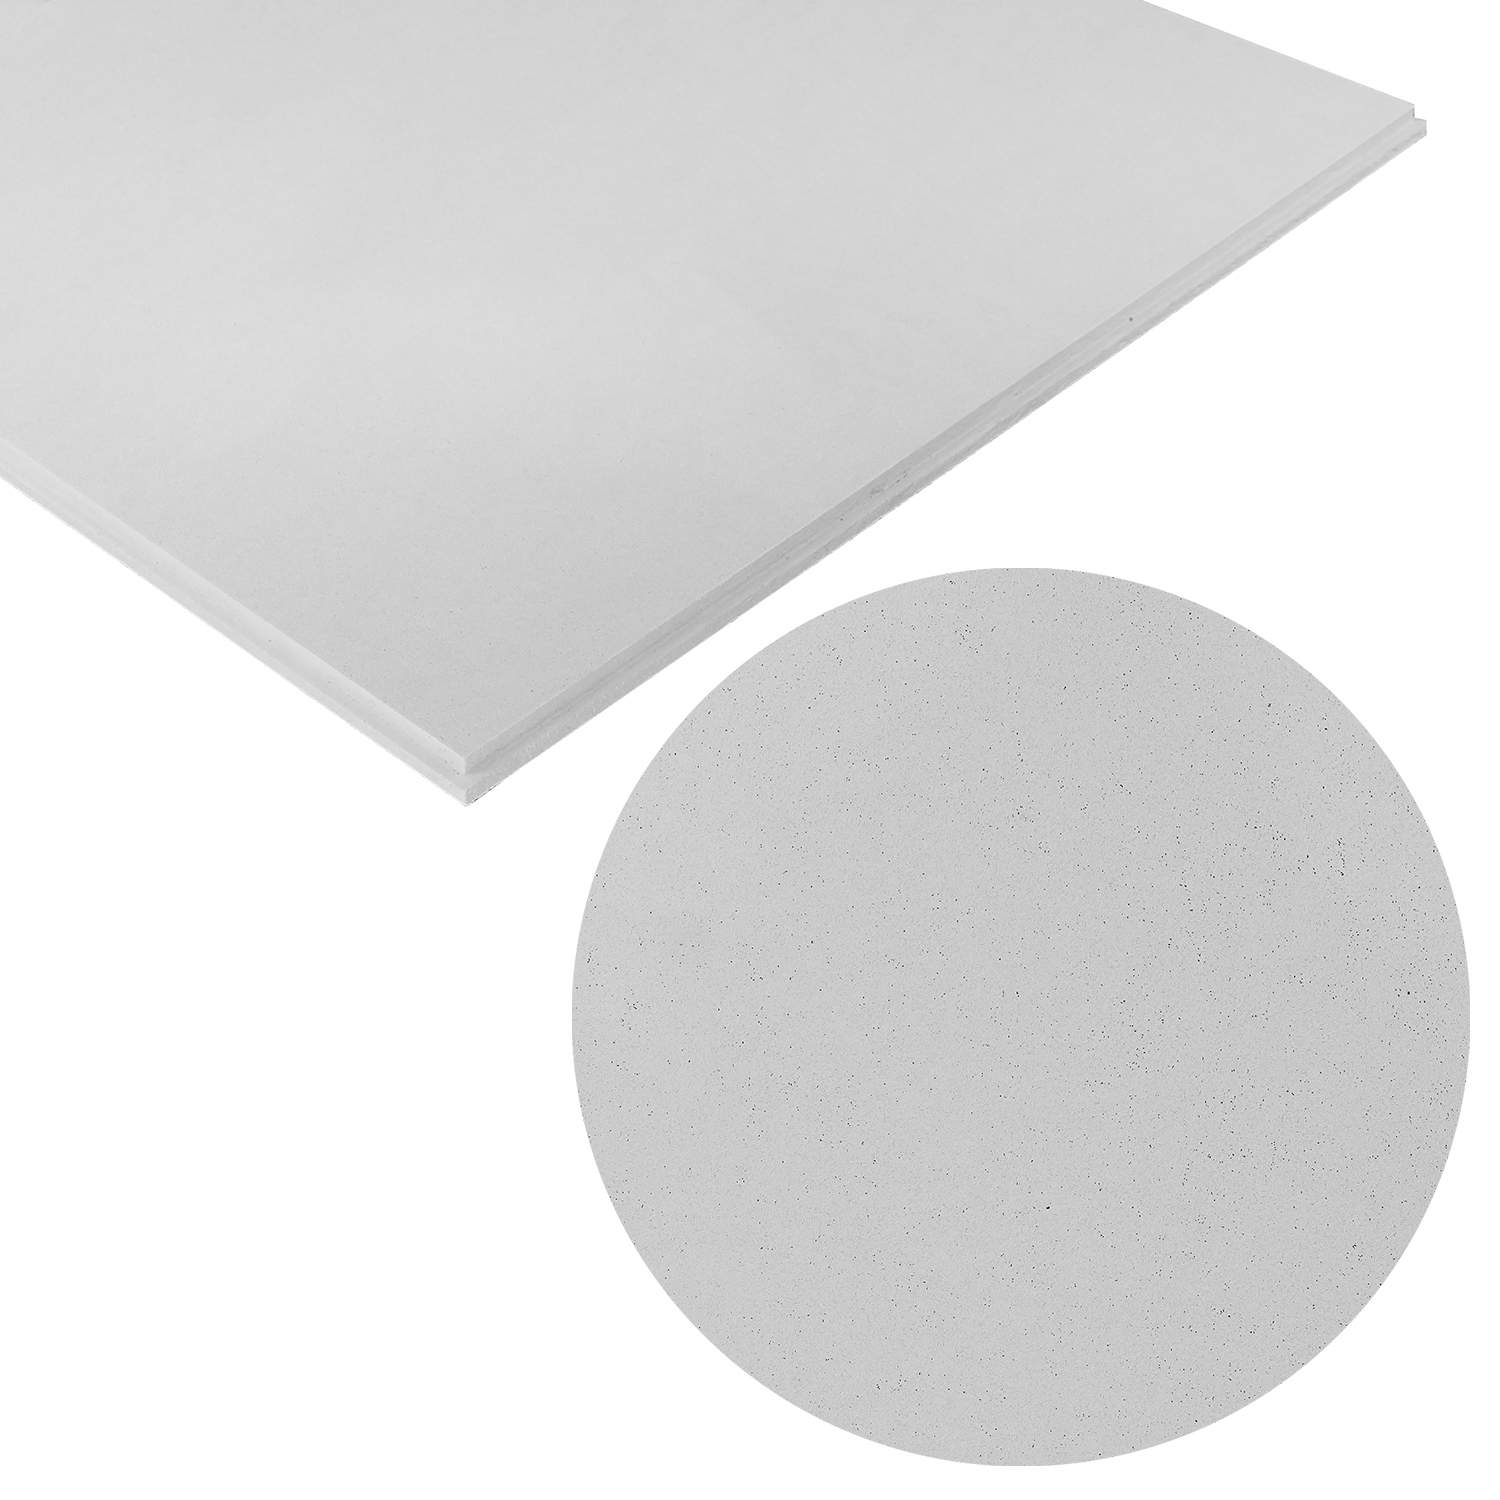 ROCKFON ARTIC Microlook Ceiling Tiles 600mm X 600mm FOR A 15MM GRID SYSTEM (Box Qty: 16)